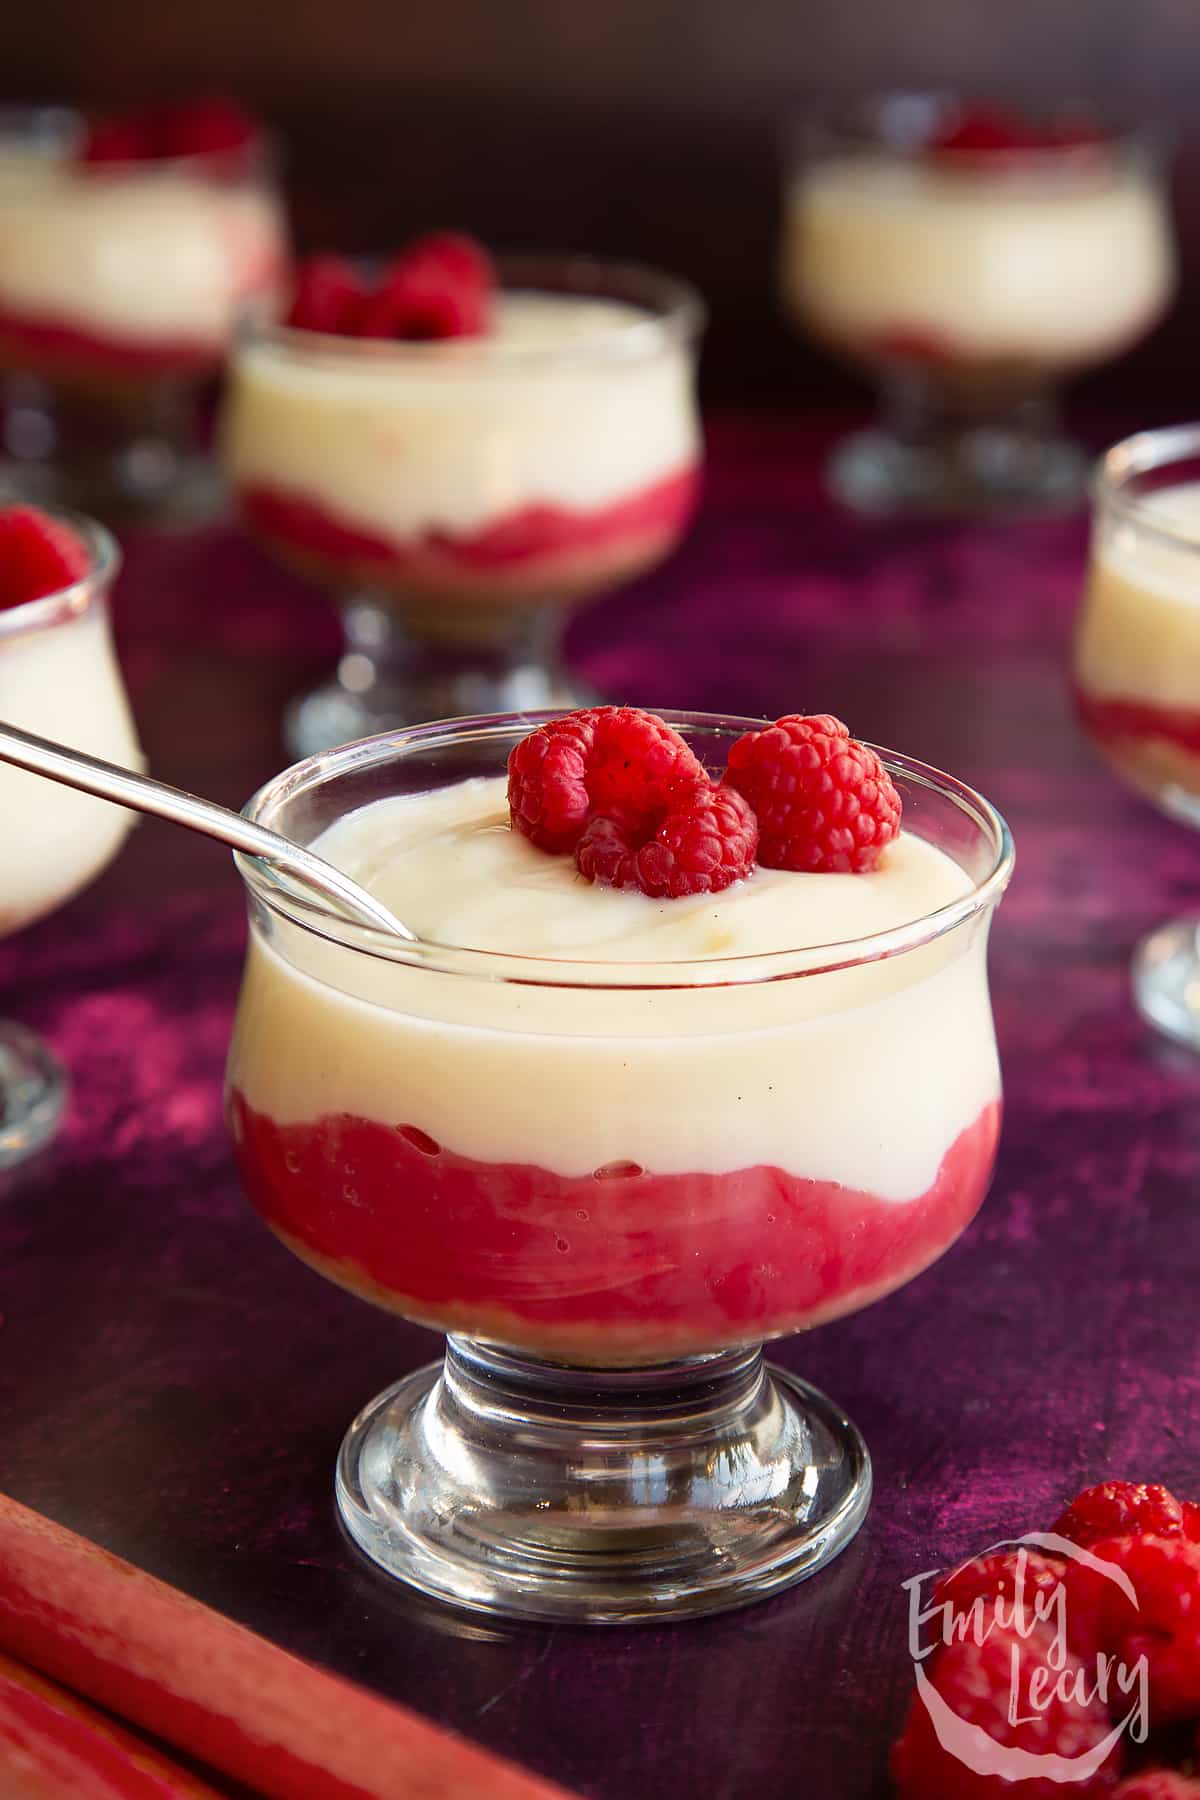 Rhubarb and custard pudding in a glass dish topped with raspberries.